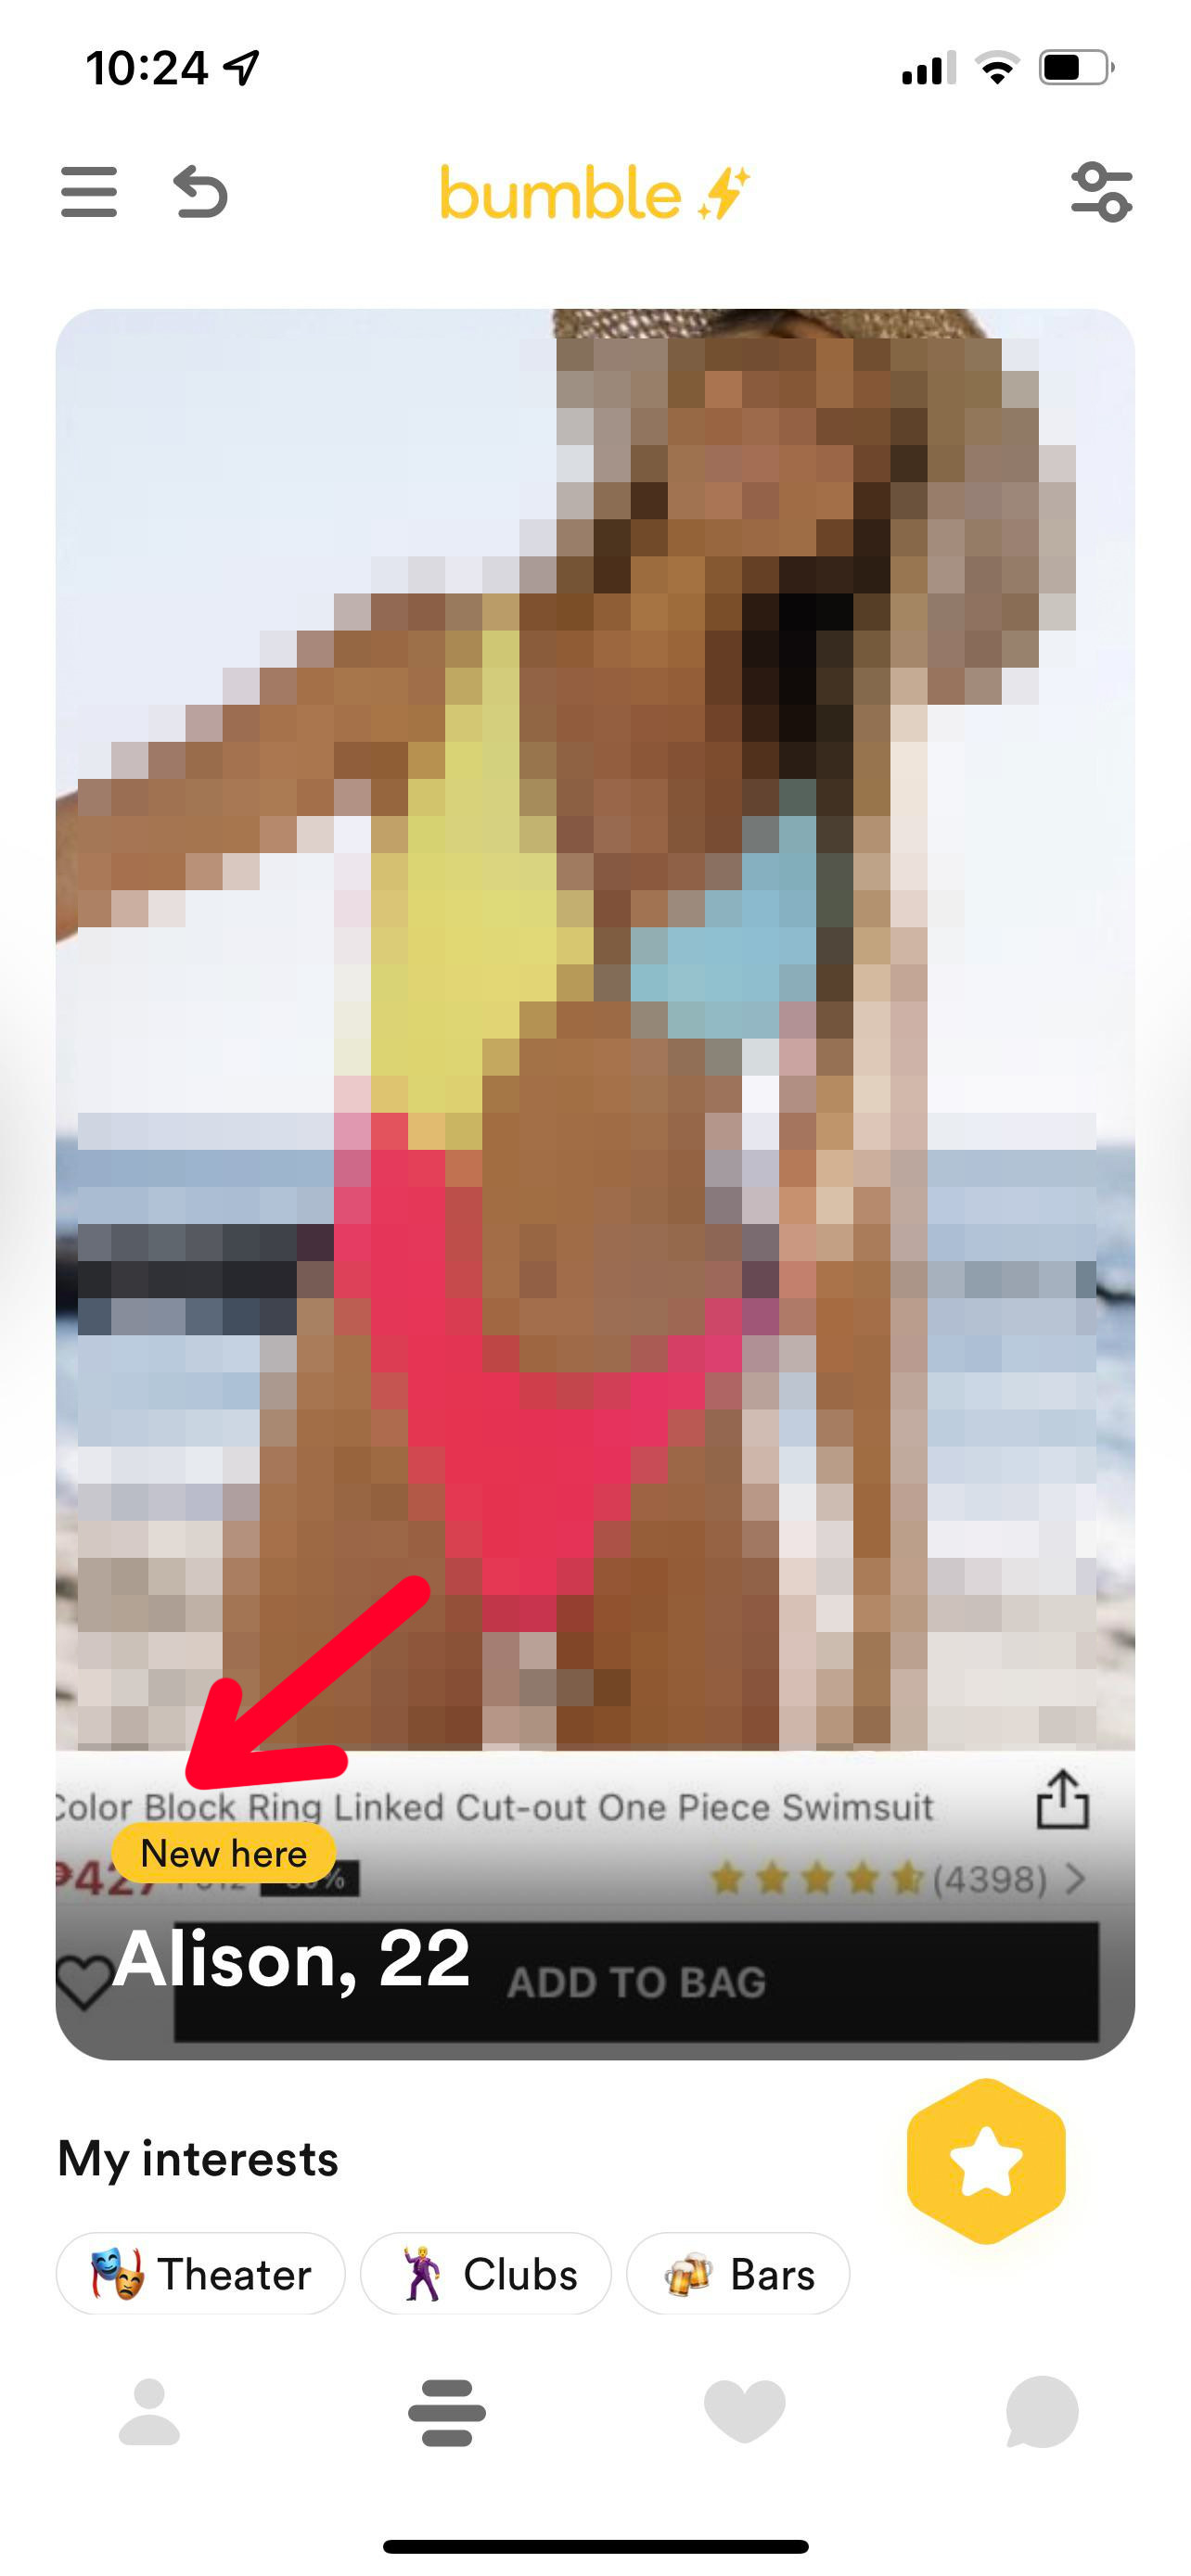 Someone&#x27;s Bumble photo is a screenshot of a woman in a swimsuit, with the shopping site the photo was pulled from clearly visible